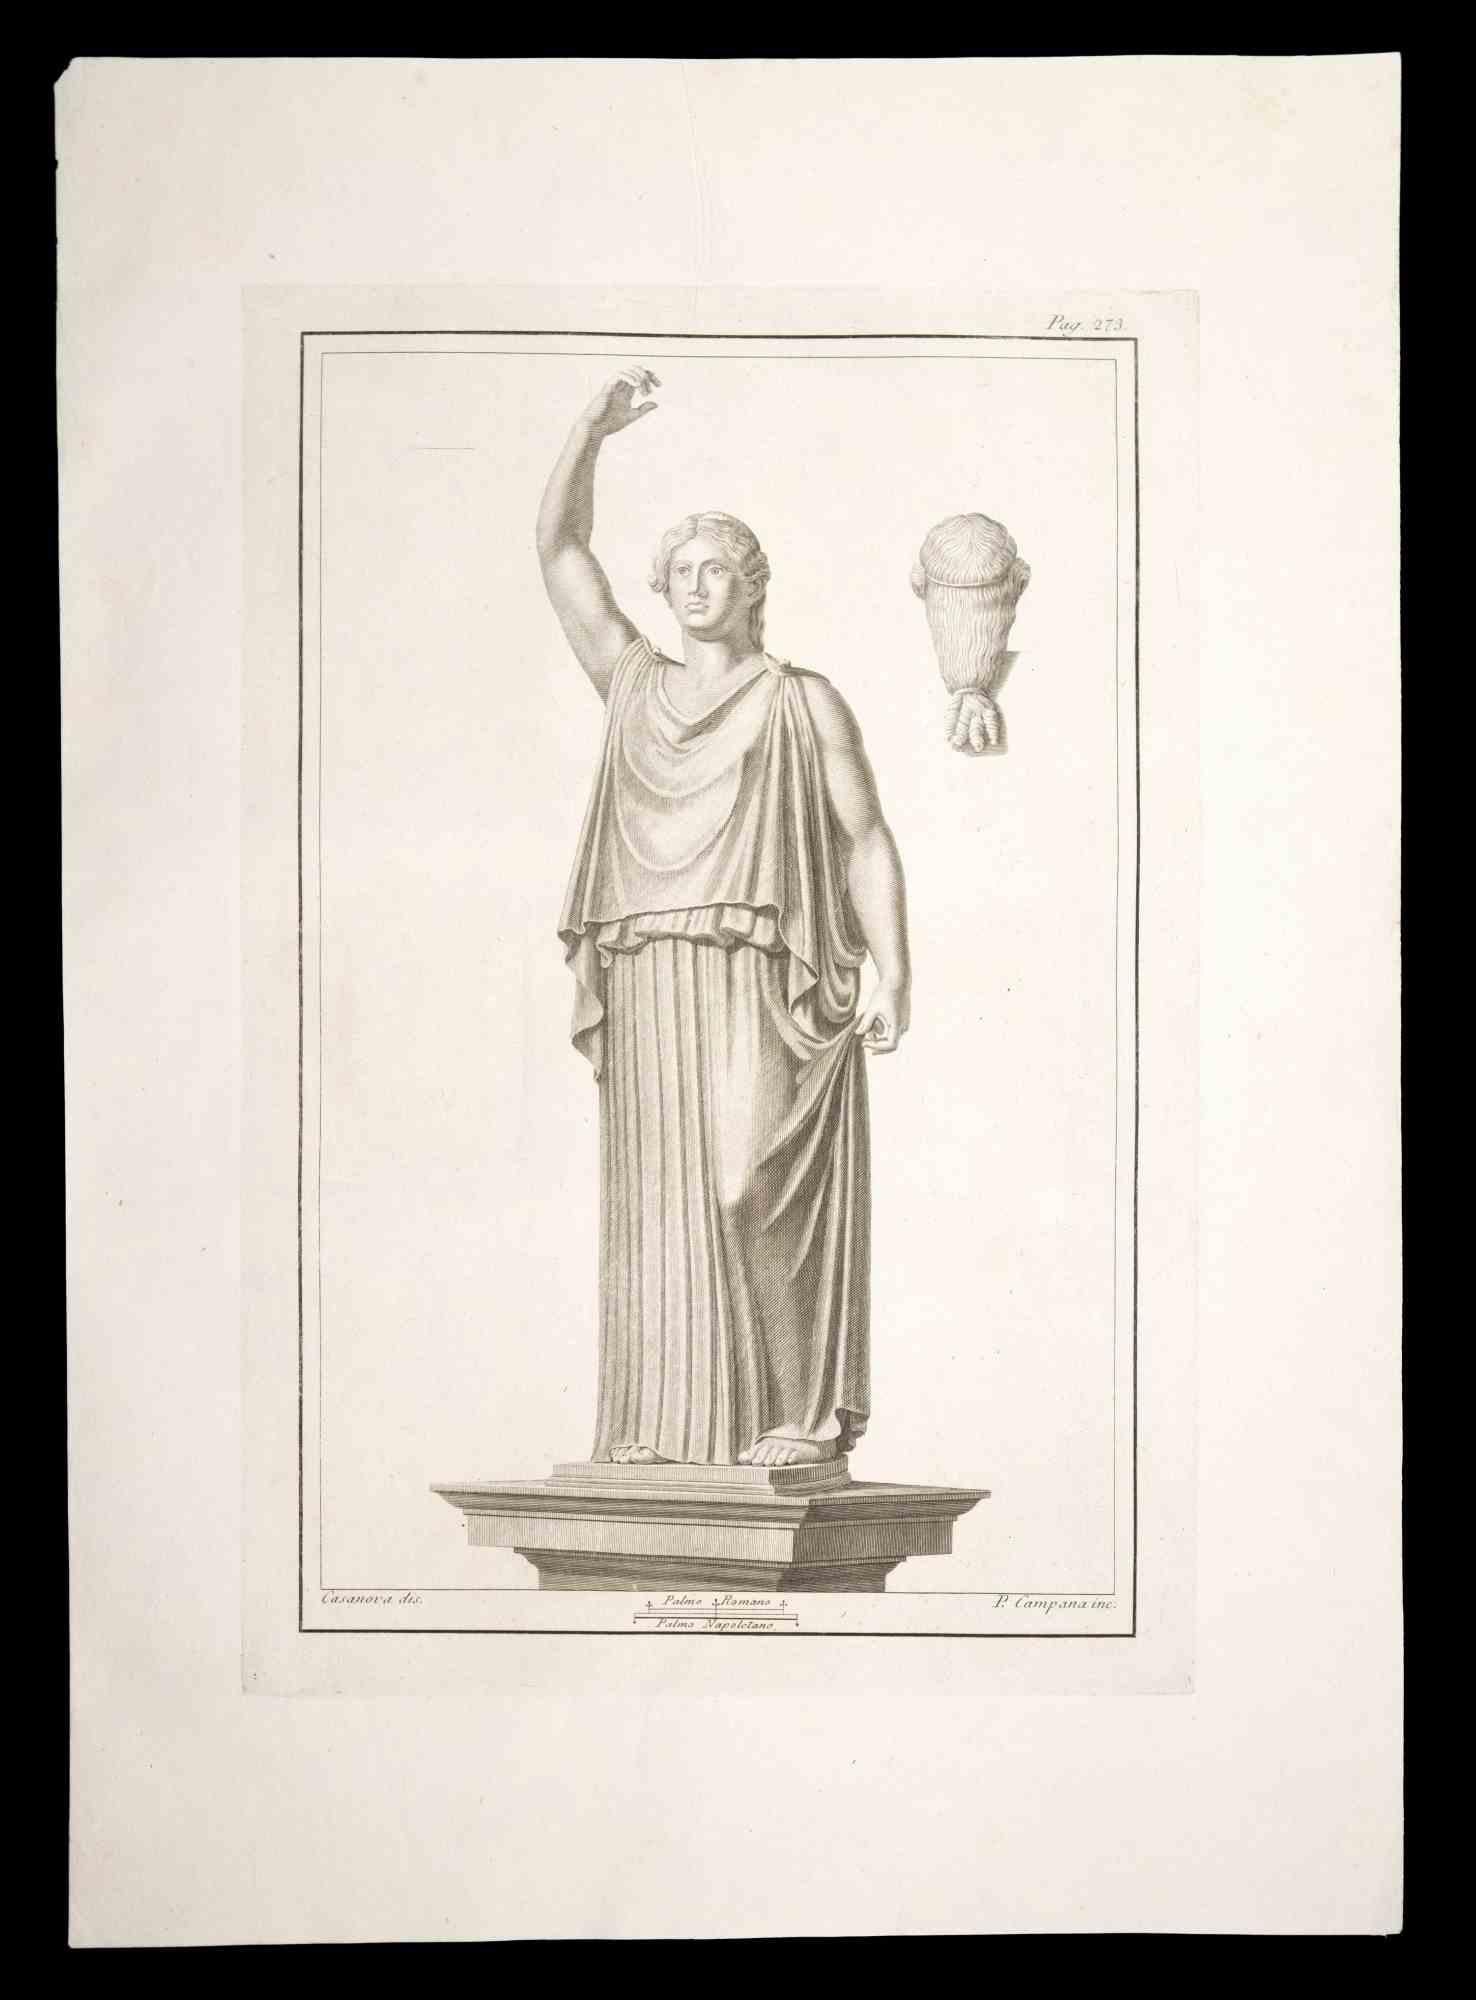 Ancient Roman Statue, from the series "Antiquities of Herculaneum", is an original etching on paper realized by P. Campana in the 18th Century.

Signed on the plate, on the lower right.

Good conditions with slight folding.

The etching belongs to